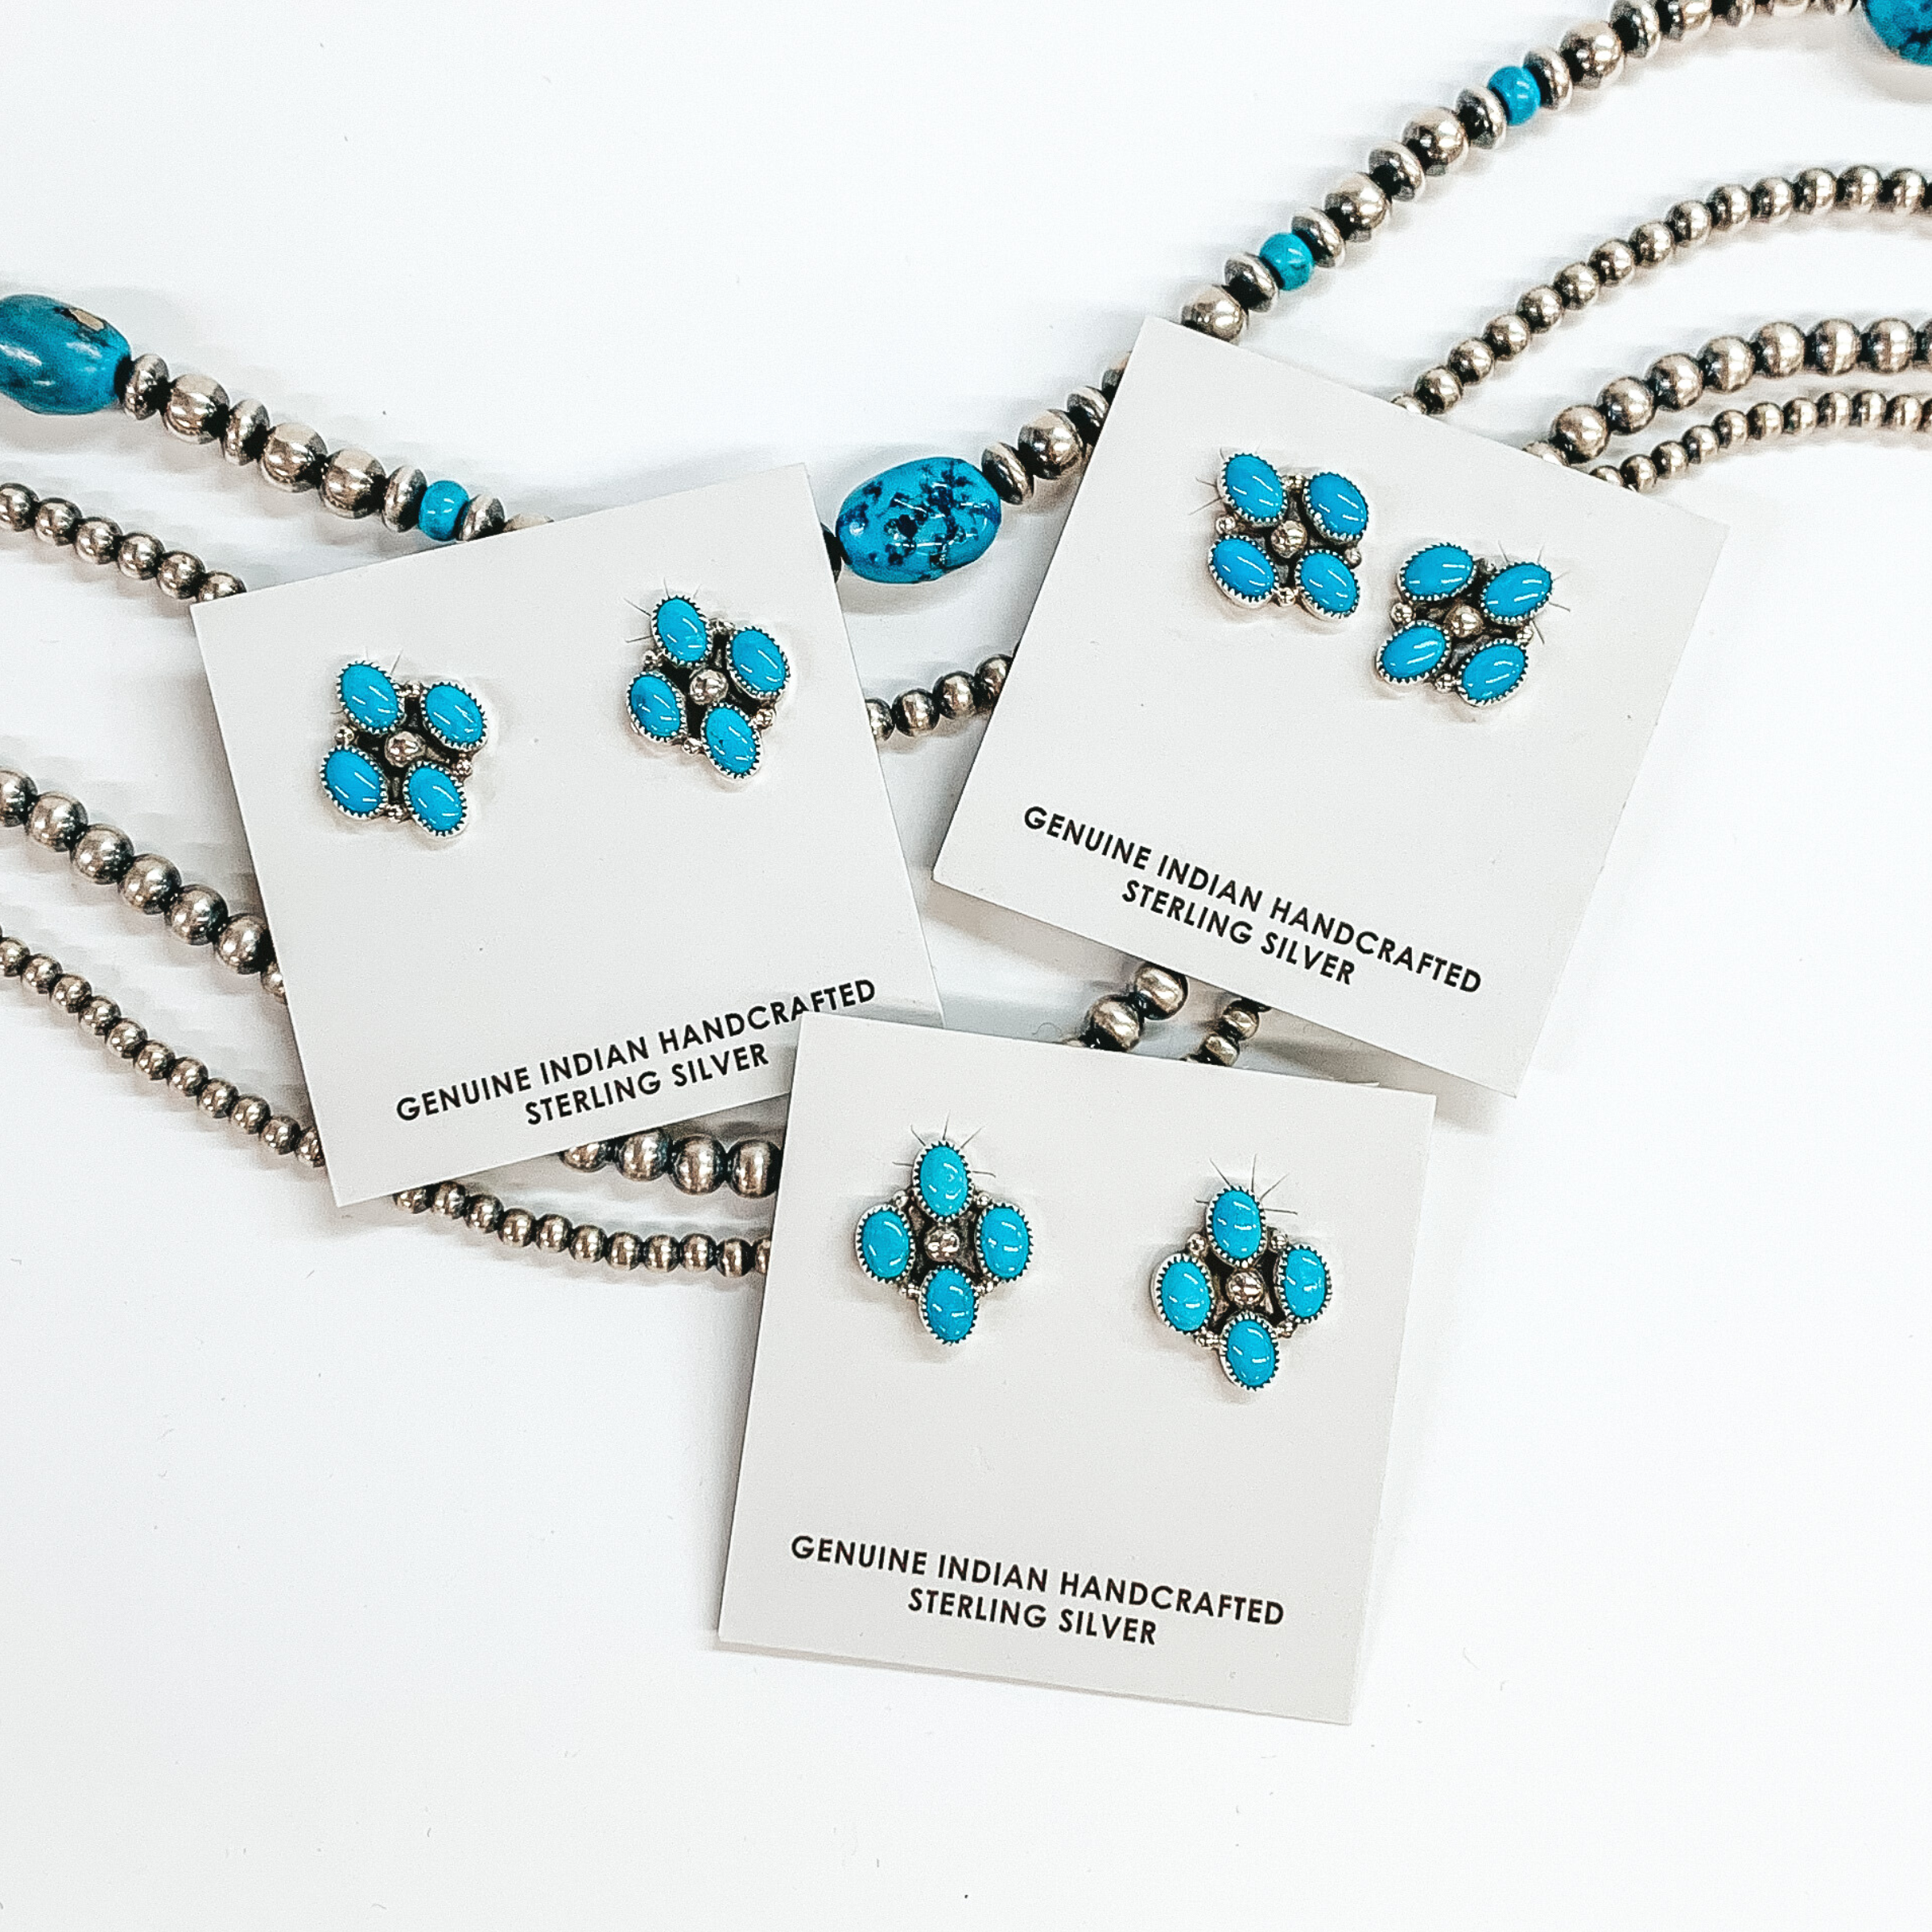 These earrings have a silver base and center silver bead with four oval turquoise stones. These earrings are pictured on a white cardstock pictured on a white background with silver beads under them. 